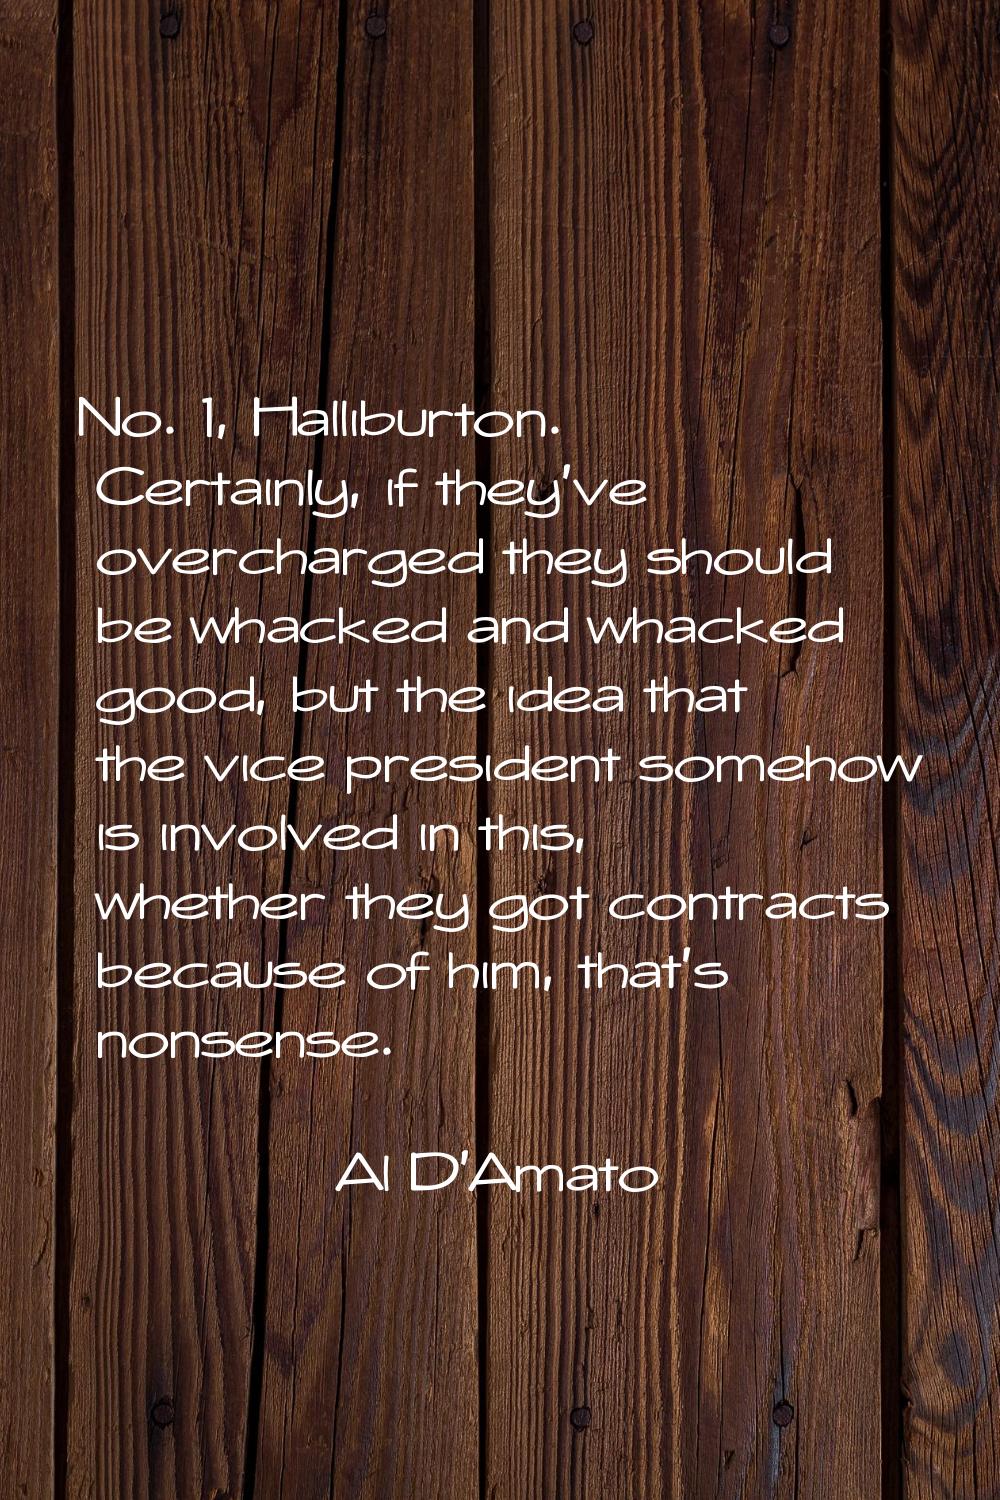 No. 1, Halliburton. Certainly, if they've overcharged they should be whacked and whacked good, but 